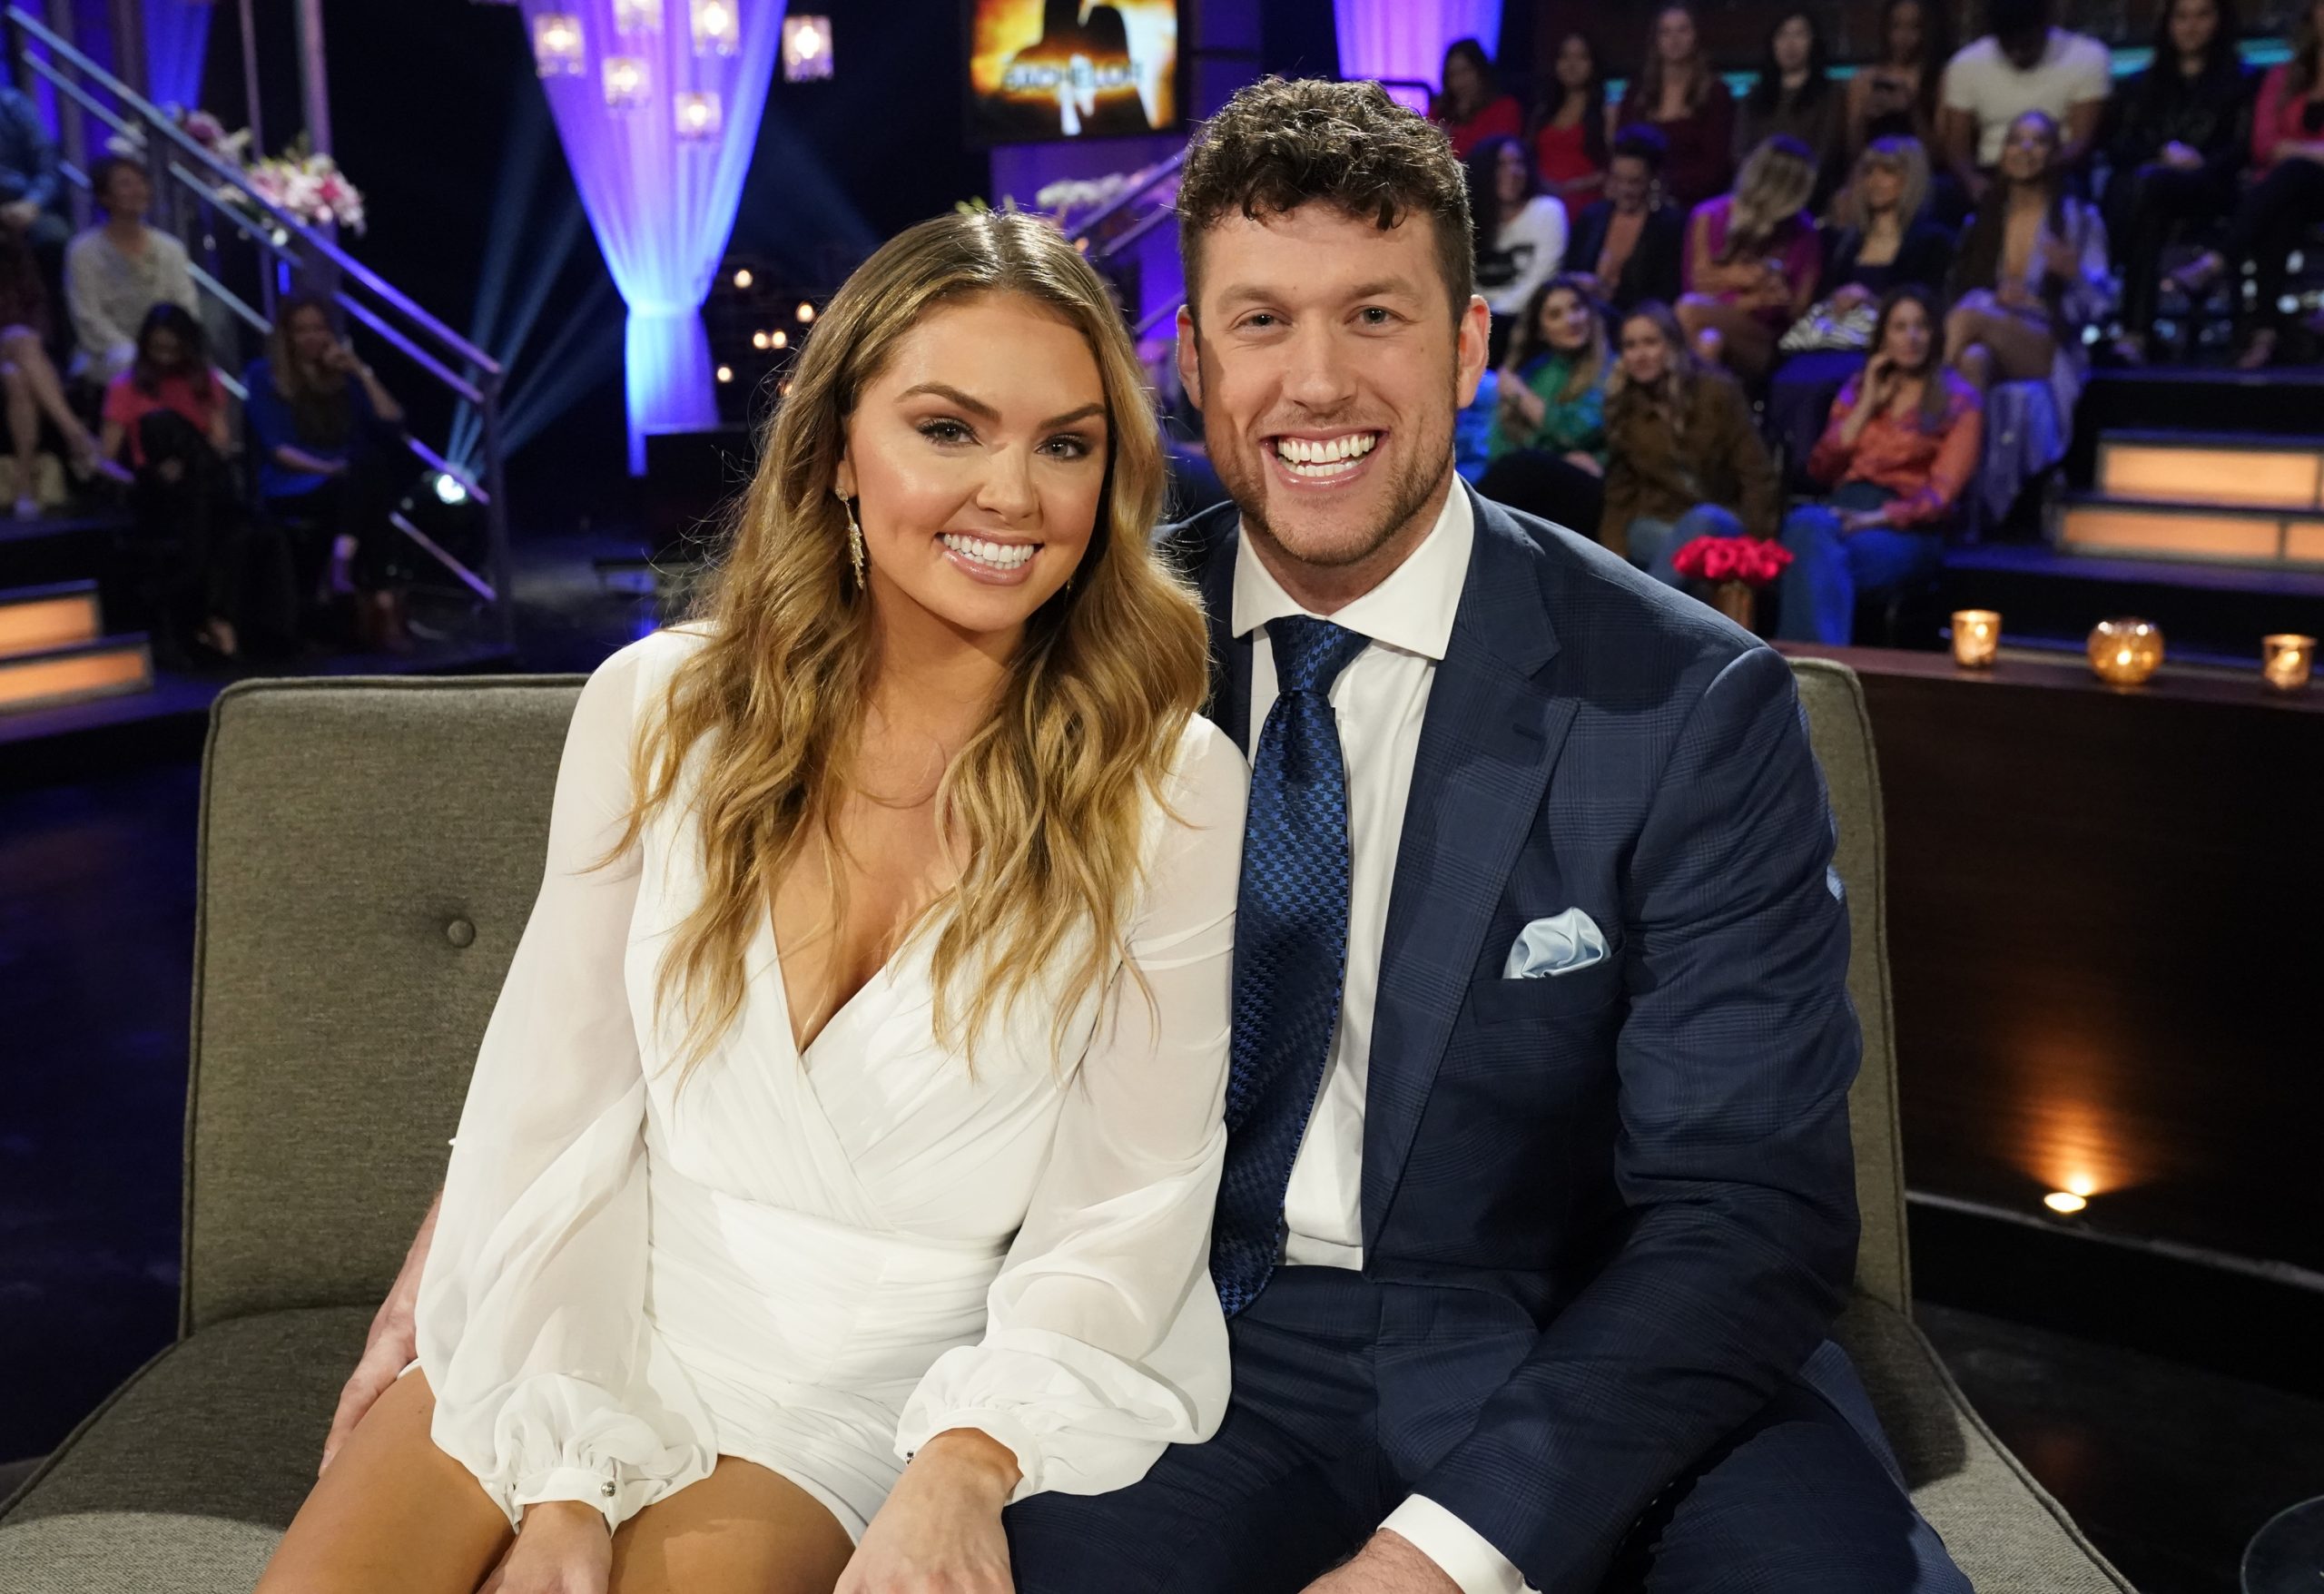 Clayton Echard and Susie Evans Are Still Together; She Defended Him During ‘The Bachelorette’ Season 19 Premiere